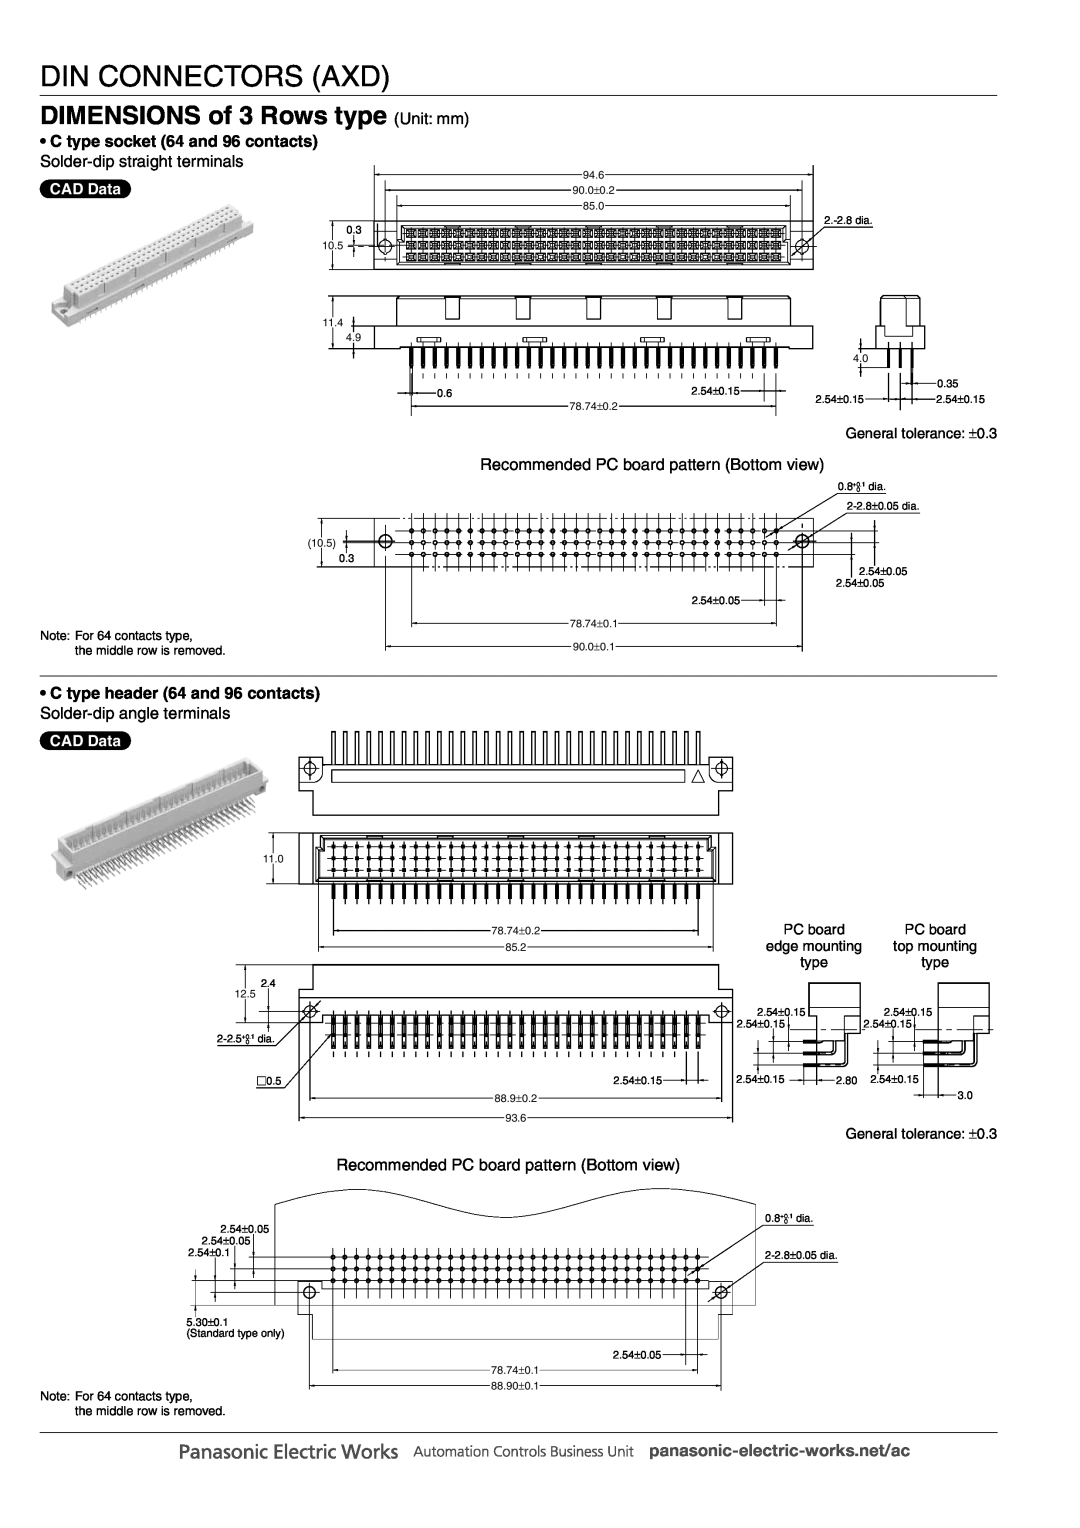 Panasonic DIN Connectors DIMENSIONS of 3 Rows type Unit mm, C type socket 64 and 96 contacts, Din Connectors Axd, CAD Data 